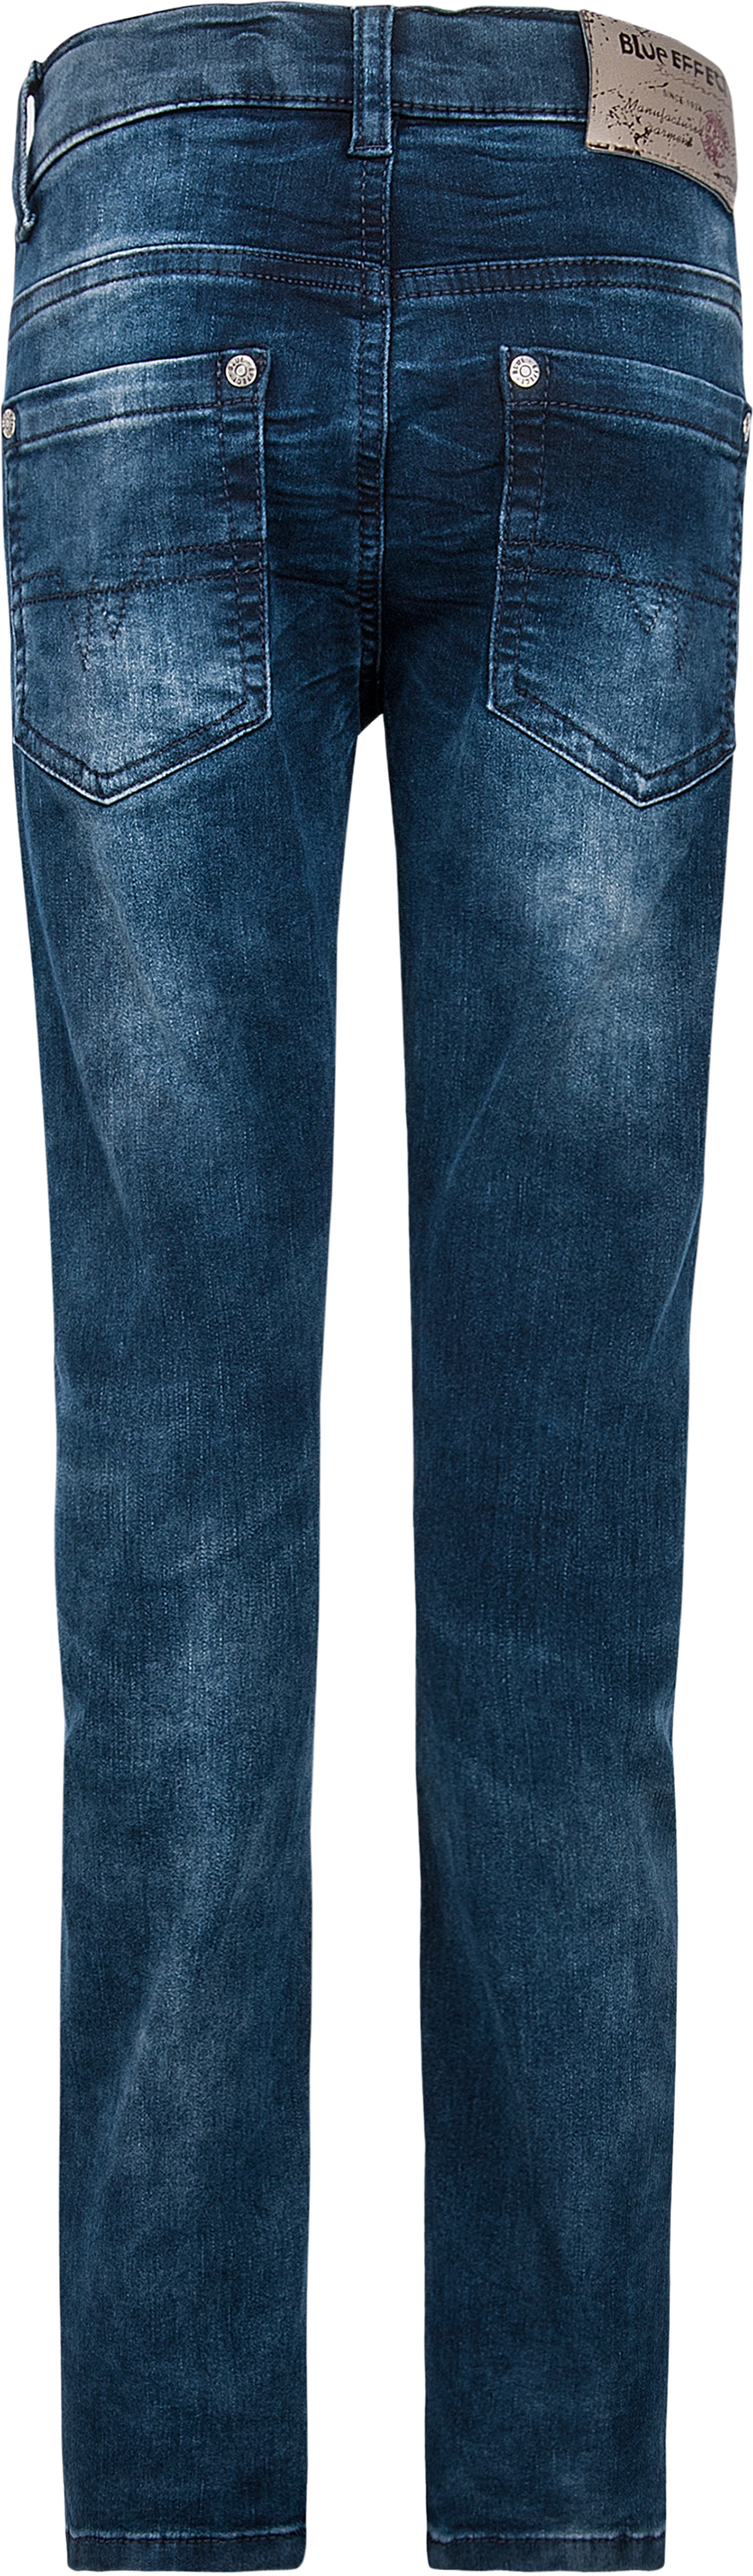 0226-NOS Boys Jeans Special Skinny, Ultrastretch, available in Slim,Normal,Wide